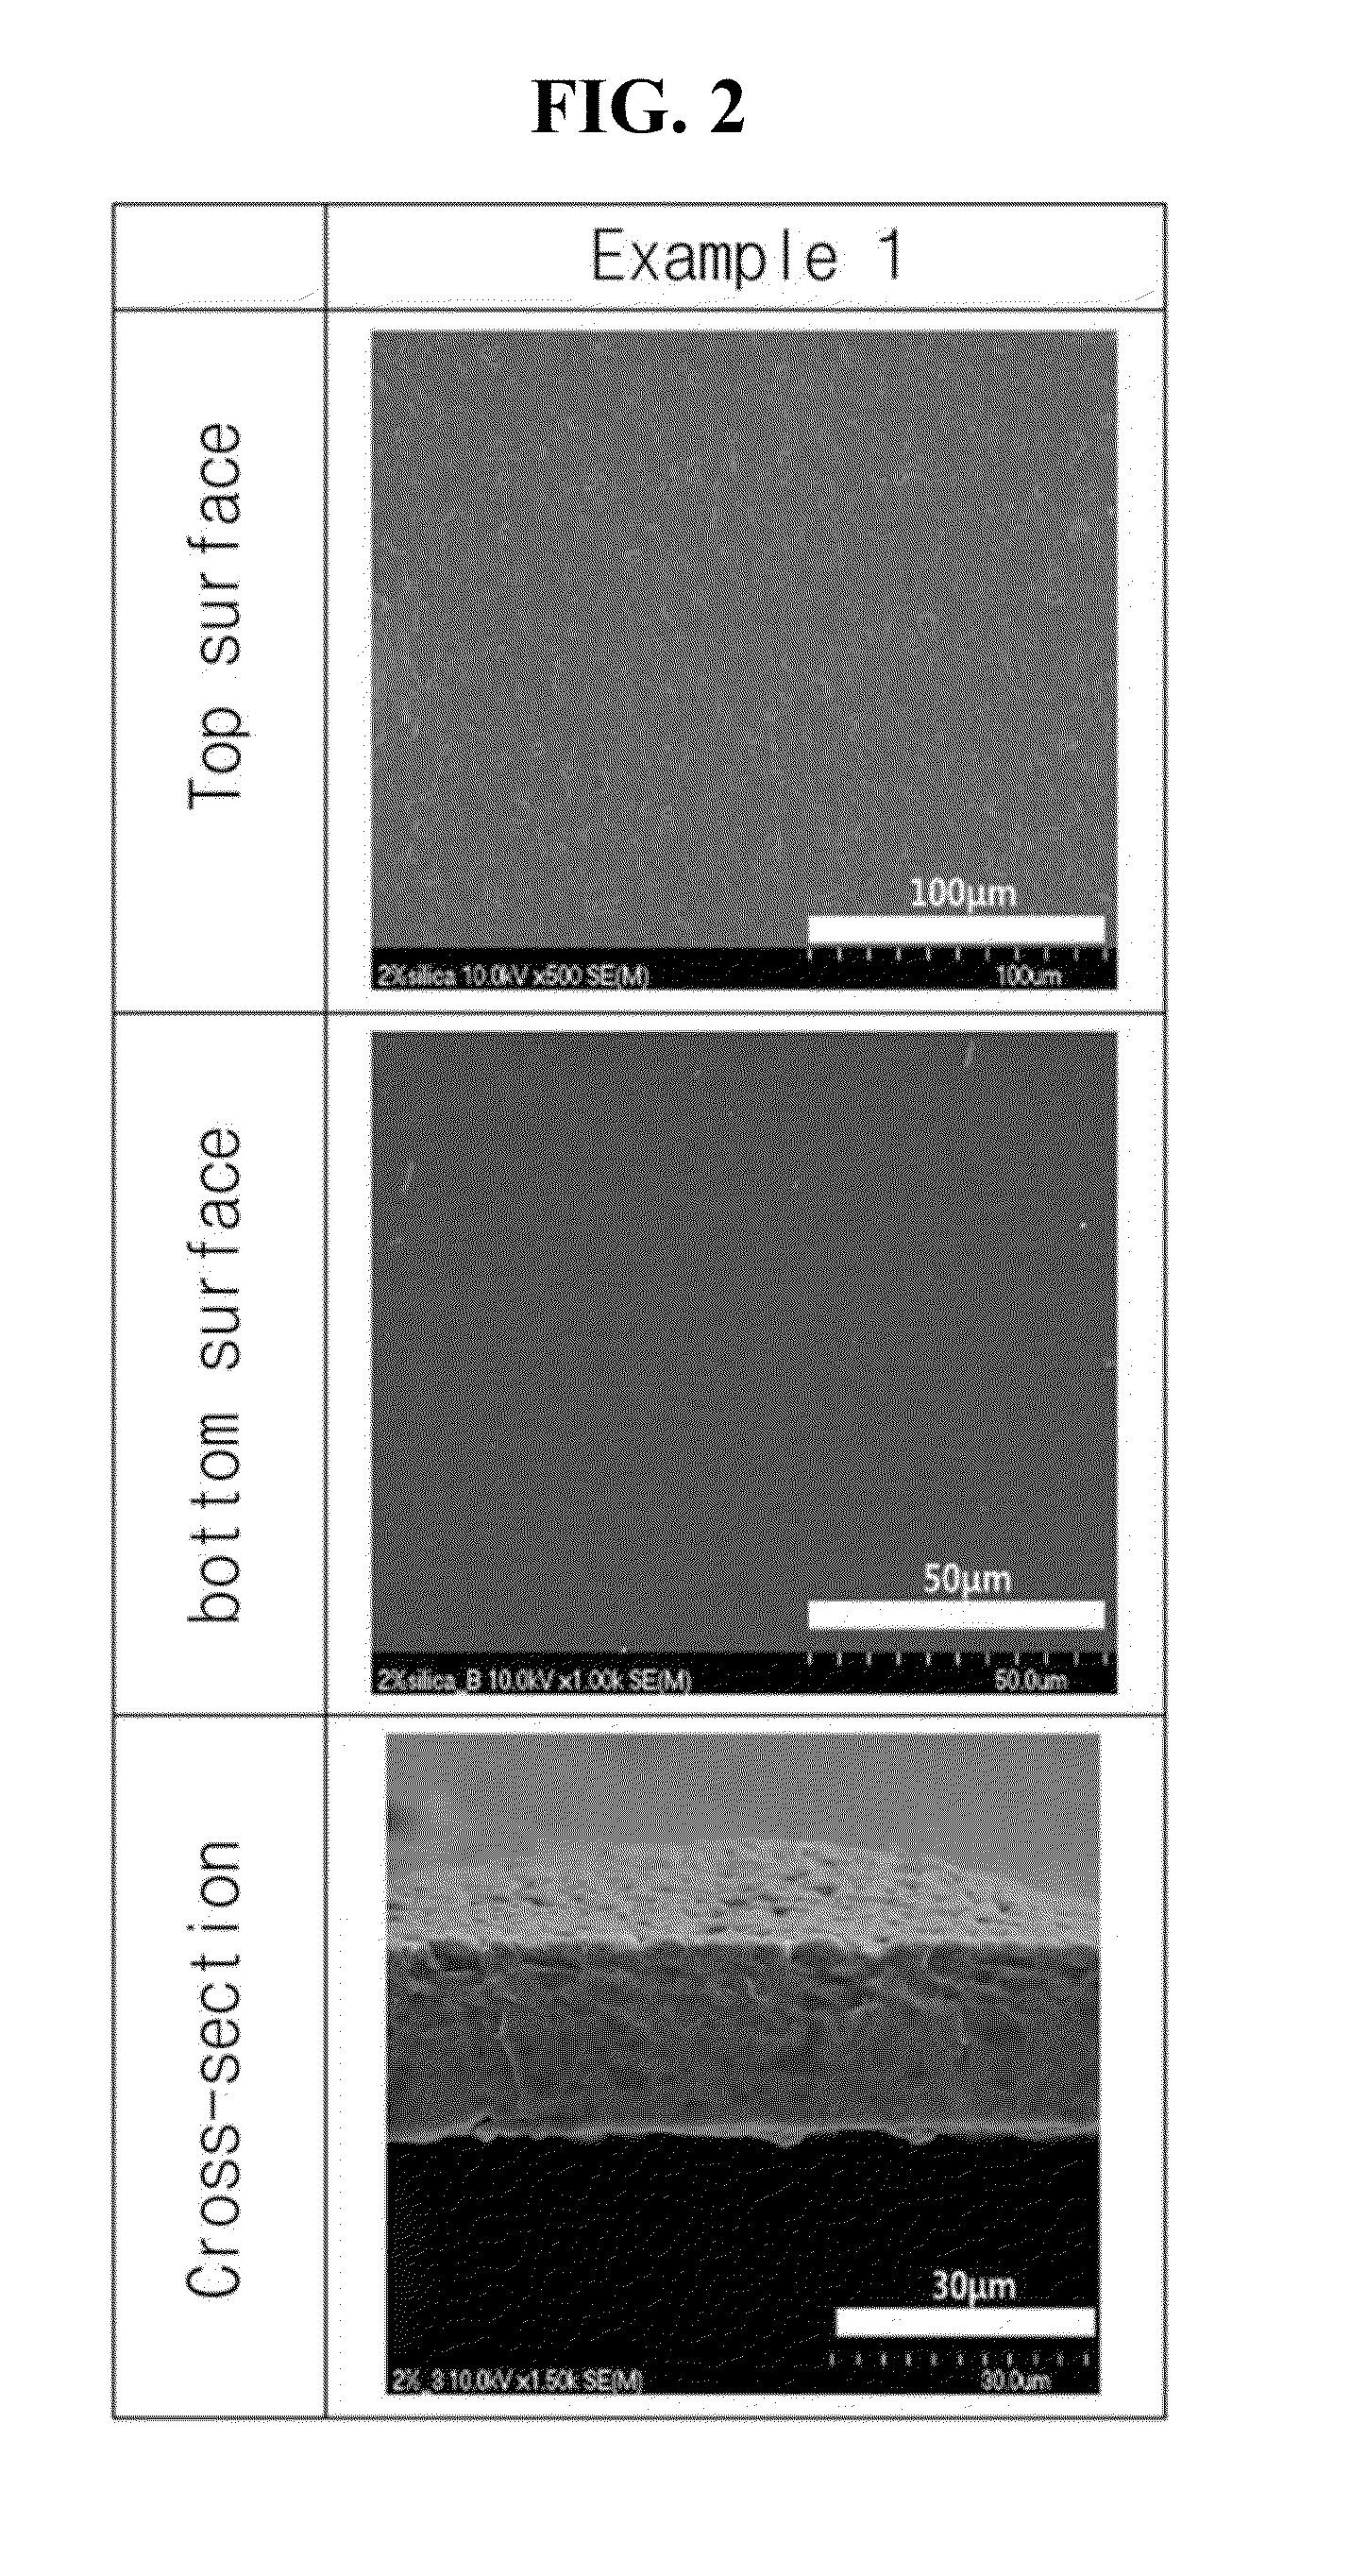 Organic-inorganic composite anion exchange membrane containing polyvinylidene fluoride polymer for non-aqueous redox flow battery and method for preparing the same